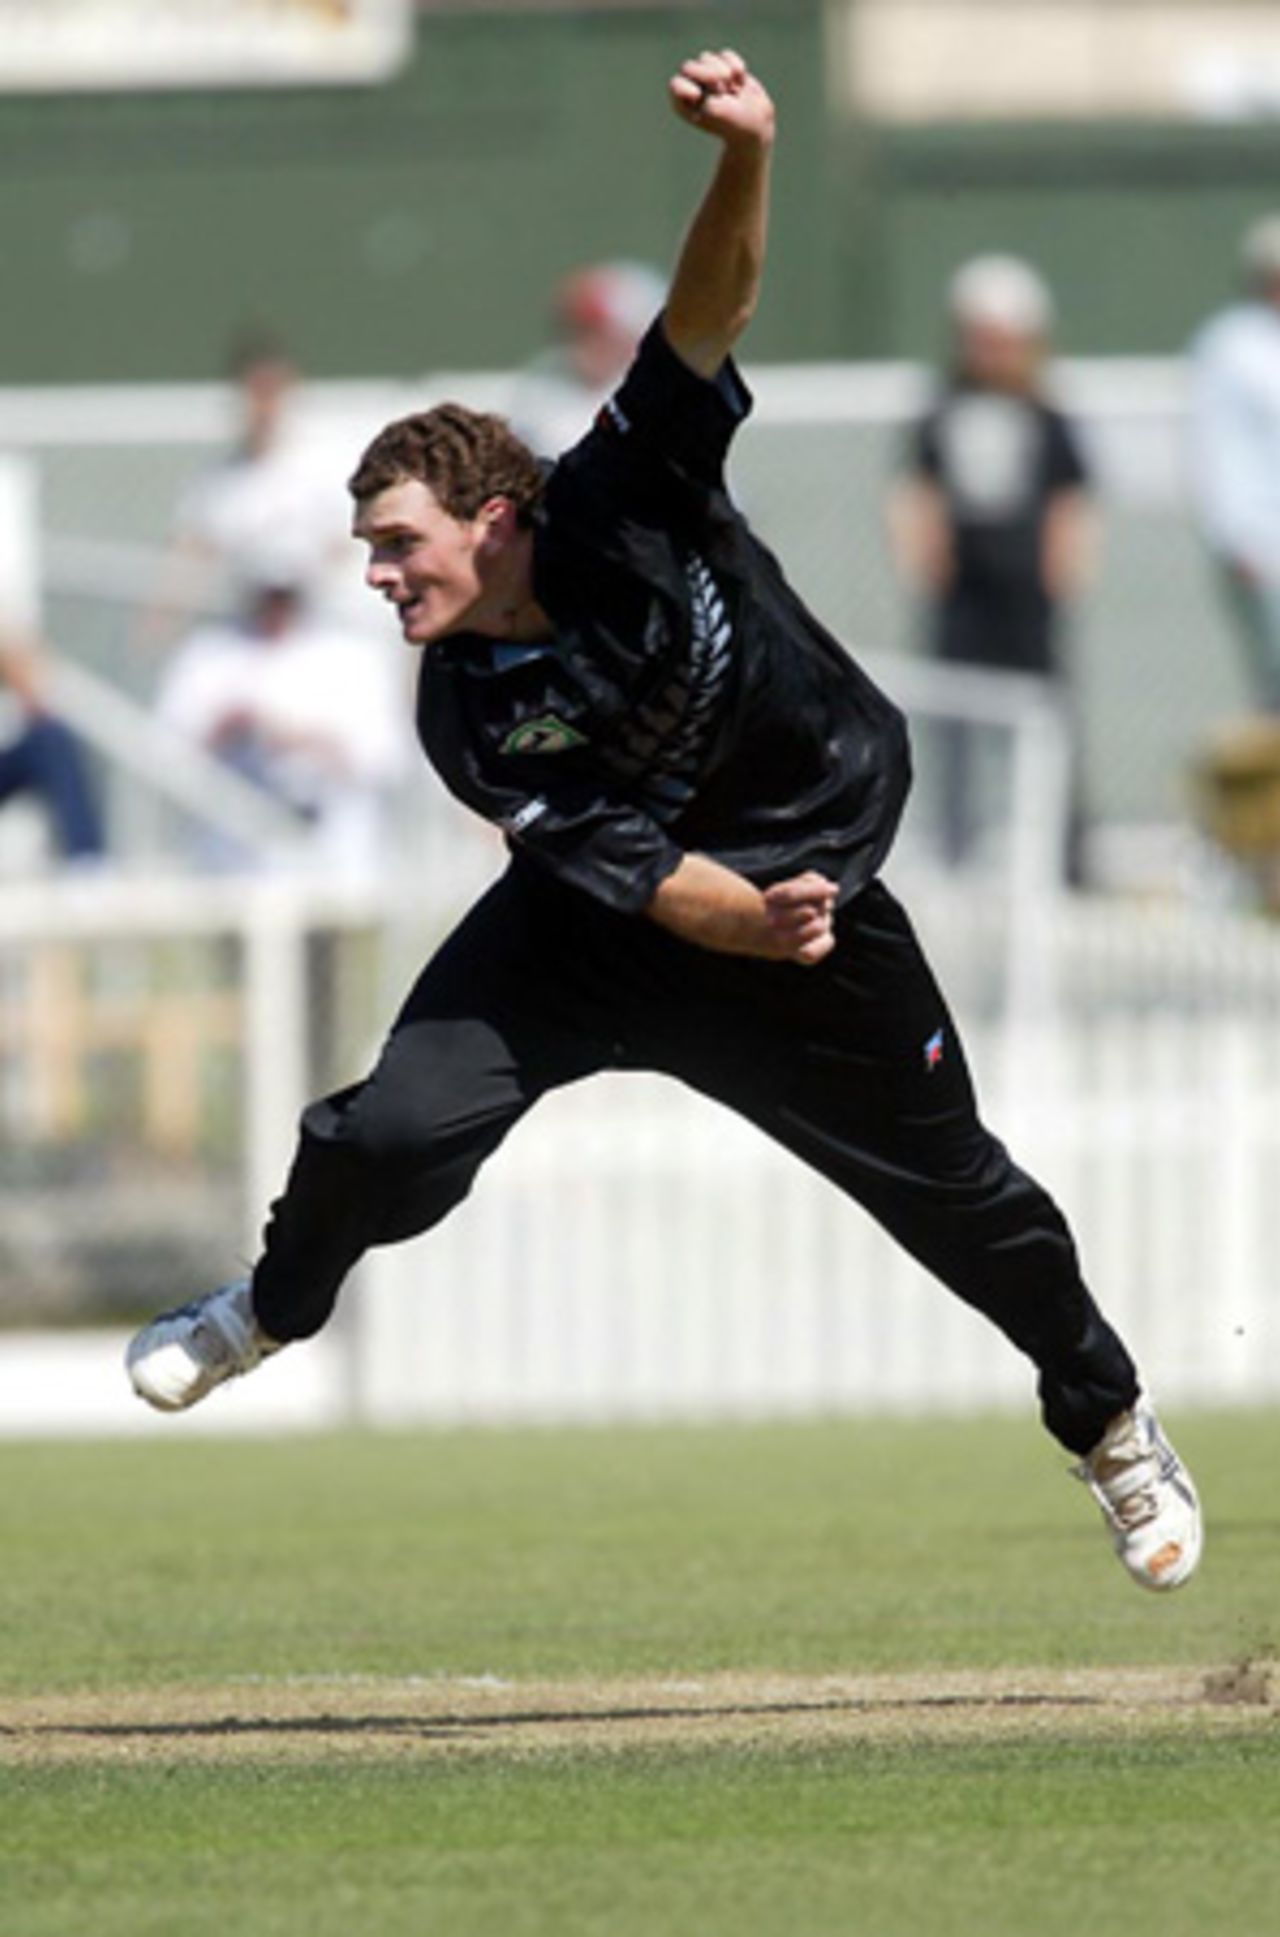 New Zealand bowler Kyle Mills delivers a ball during his spell of 1-26 from 10 overs. 3rd ODI: New Zealand v India at Jade Stadium, Christchurch, 1 January 2003.